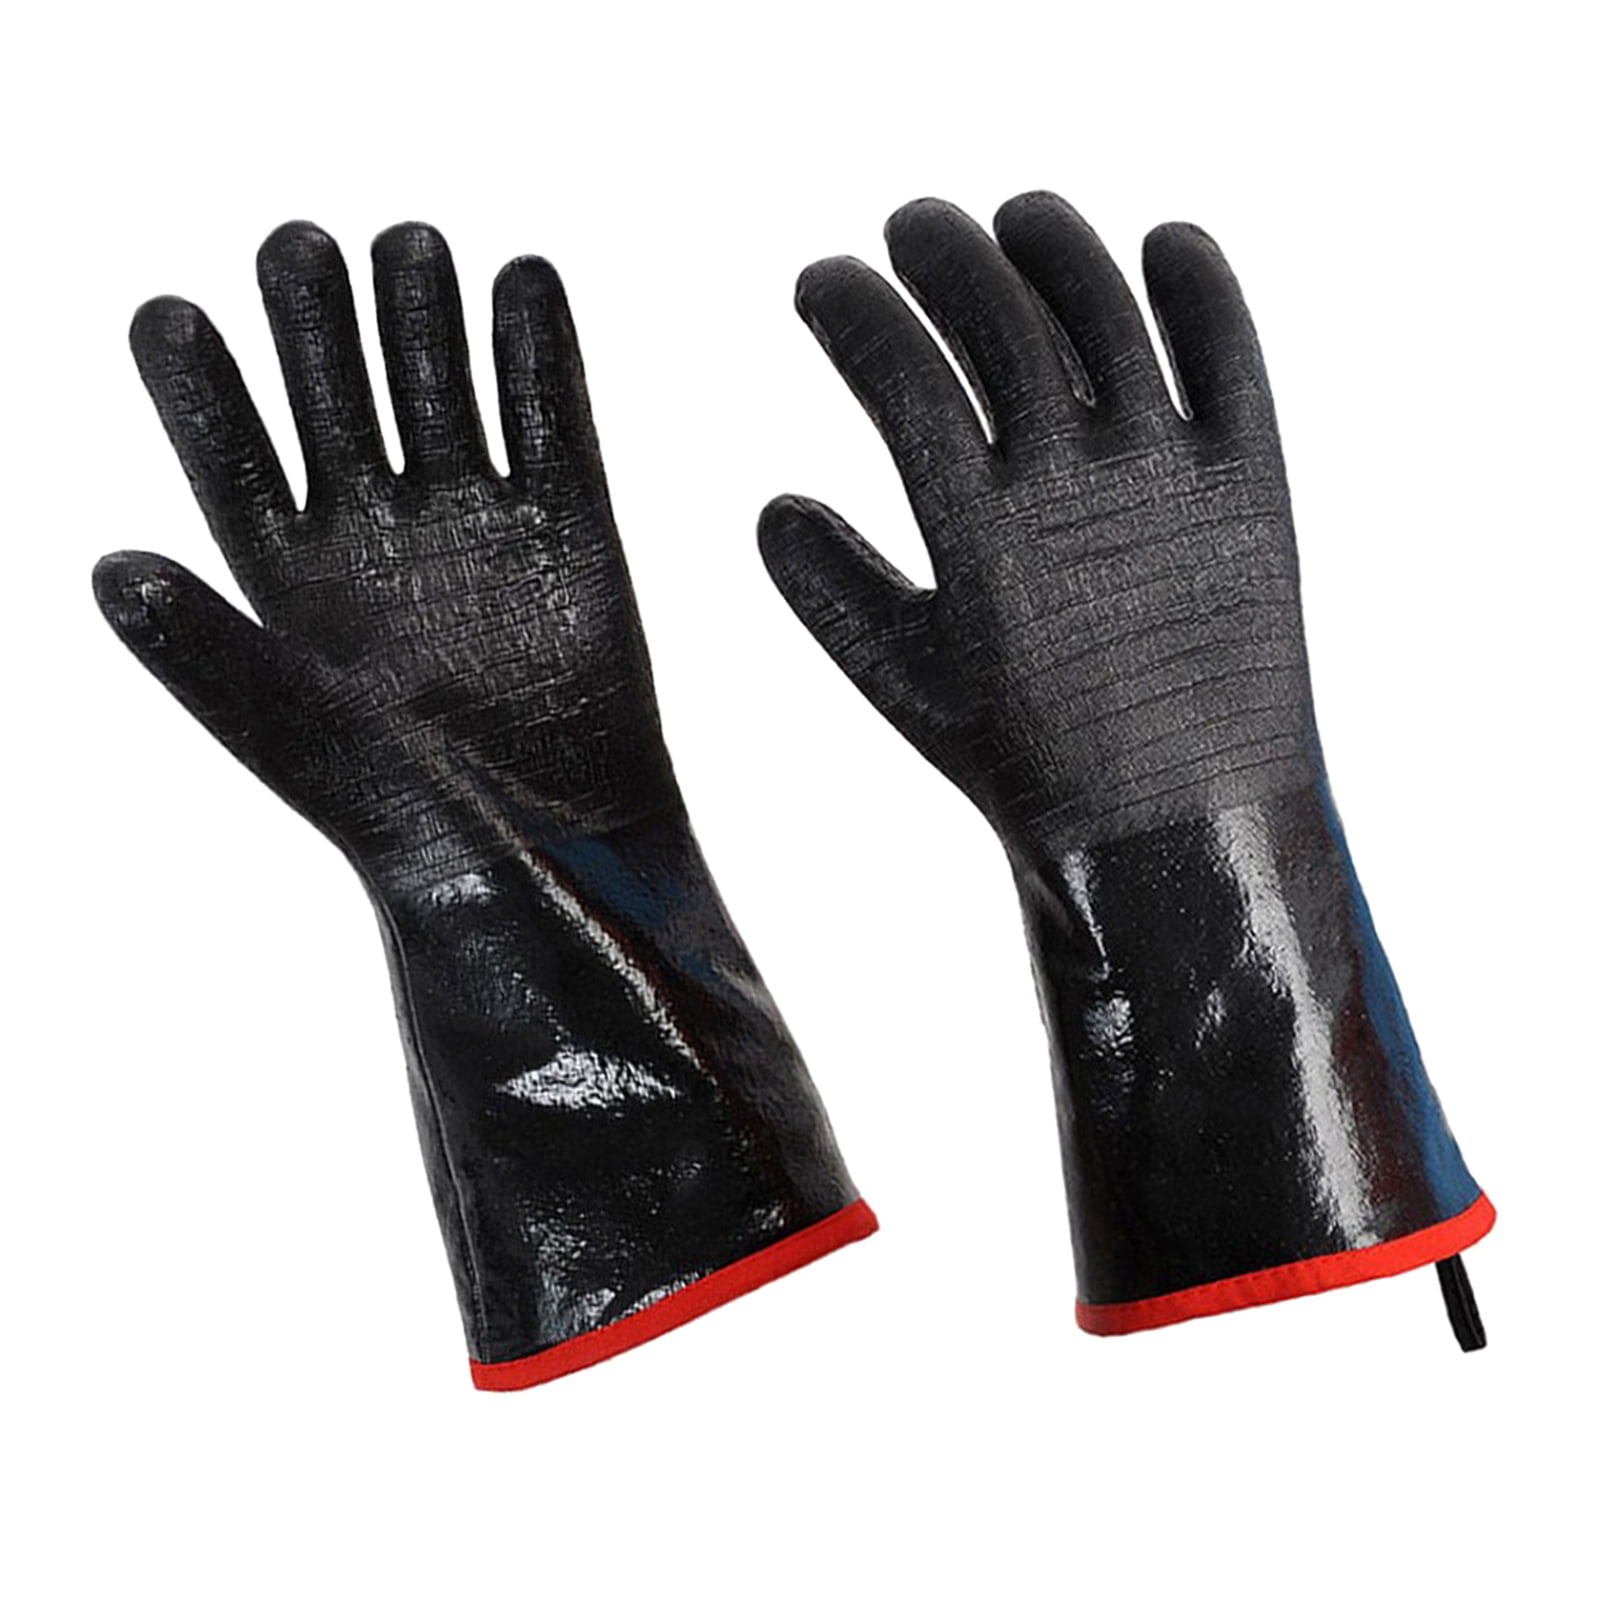 Details about   Multi-Purpose Fireproof BBQ Grill Gloves Indoor Outdoor Use For Men & Women Blac 